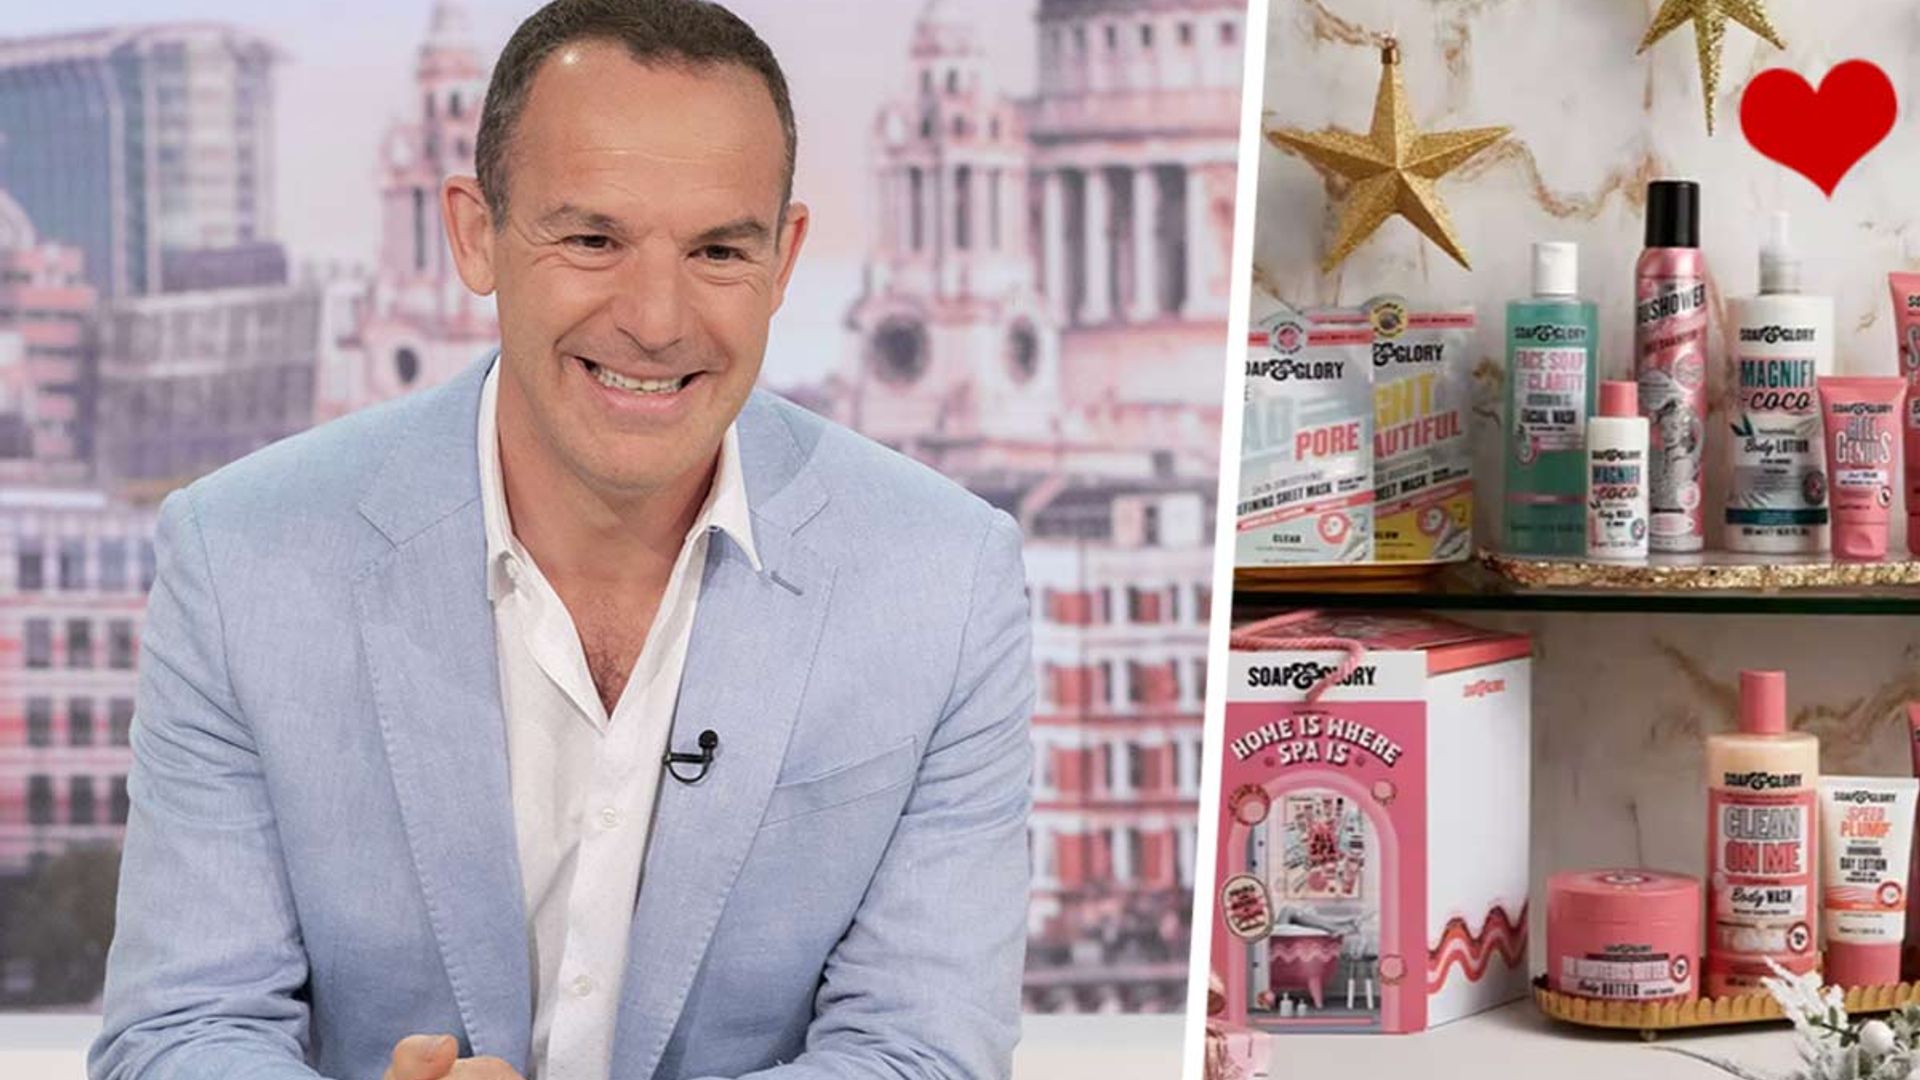 martin lewis approved soap and glory set